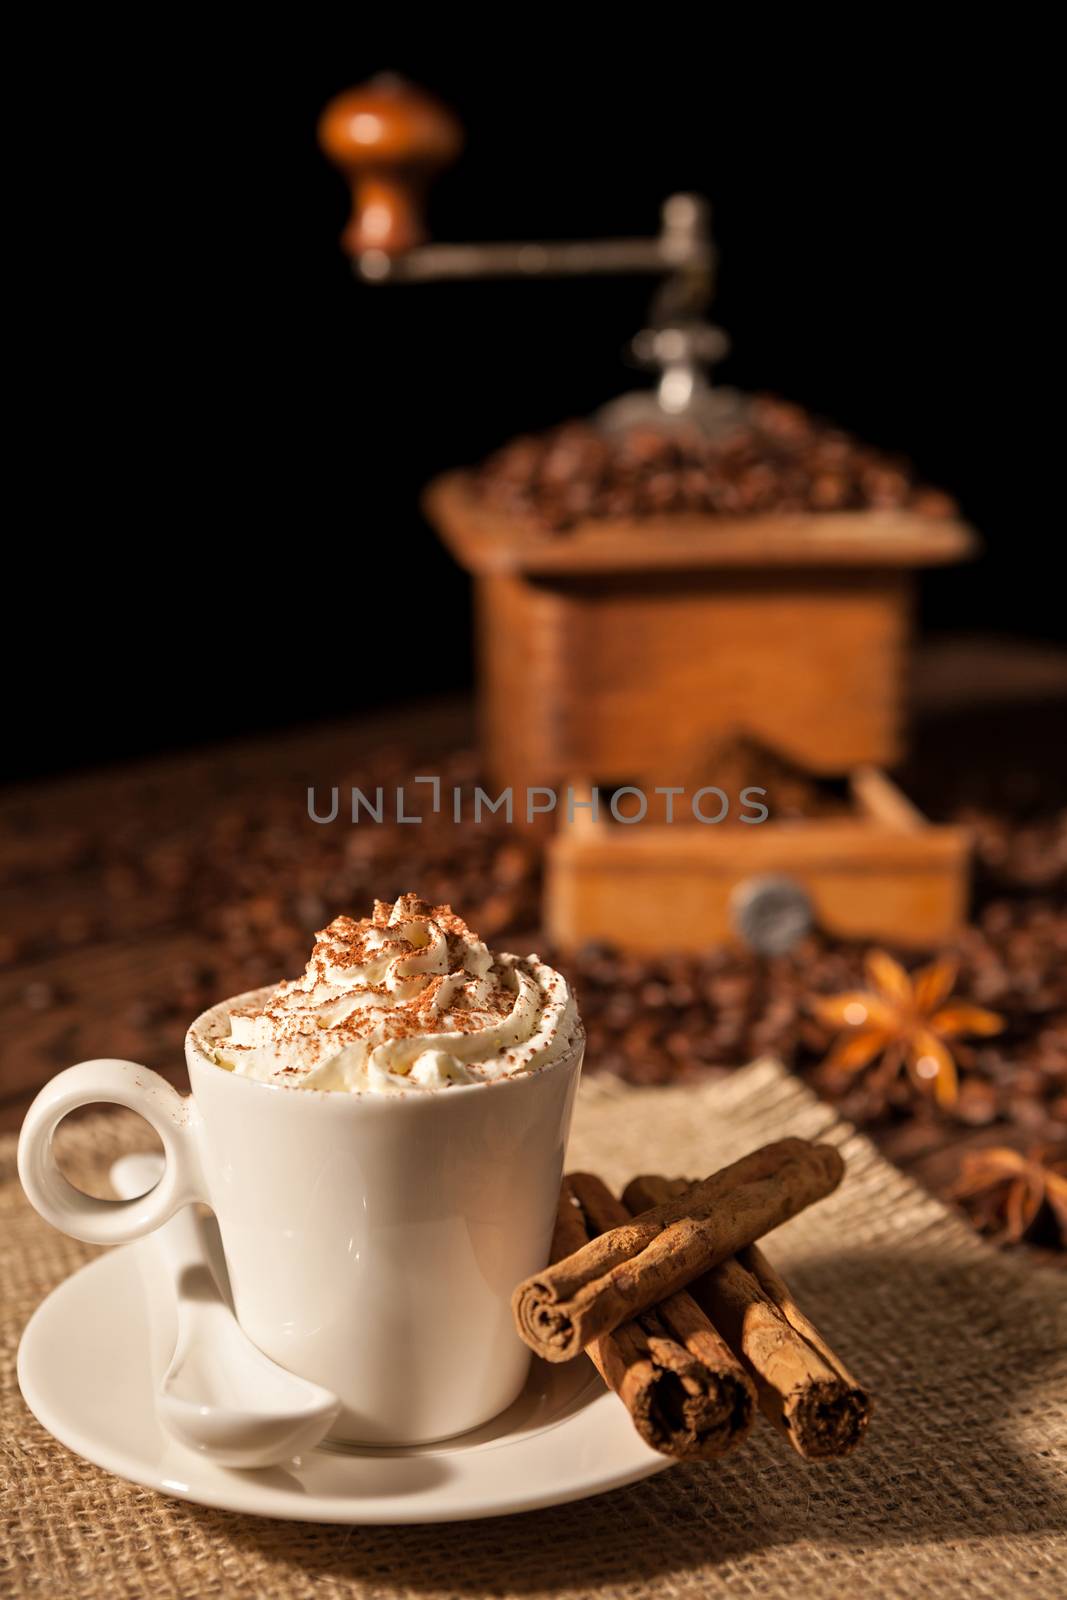 Coffee cup with whipped cream and cocoa powder and coffee grinder on background